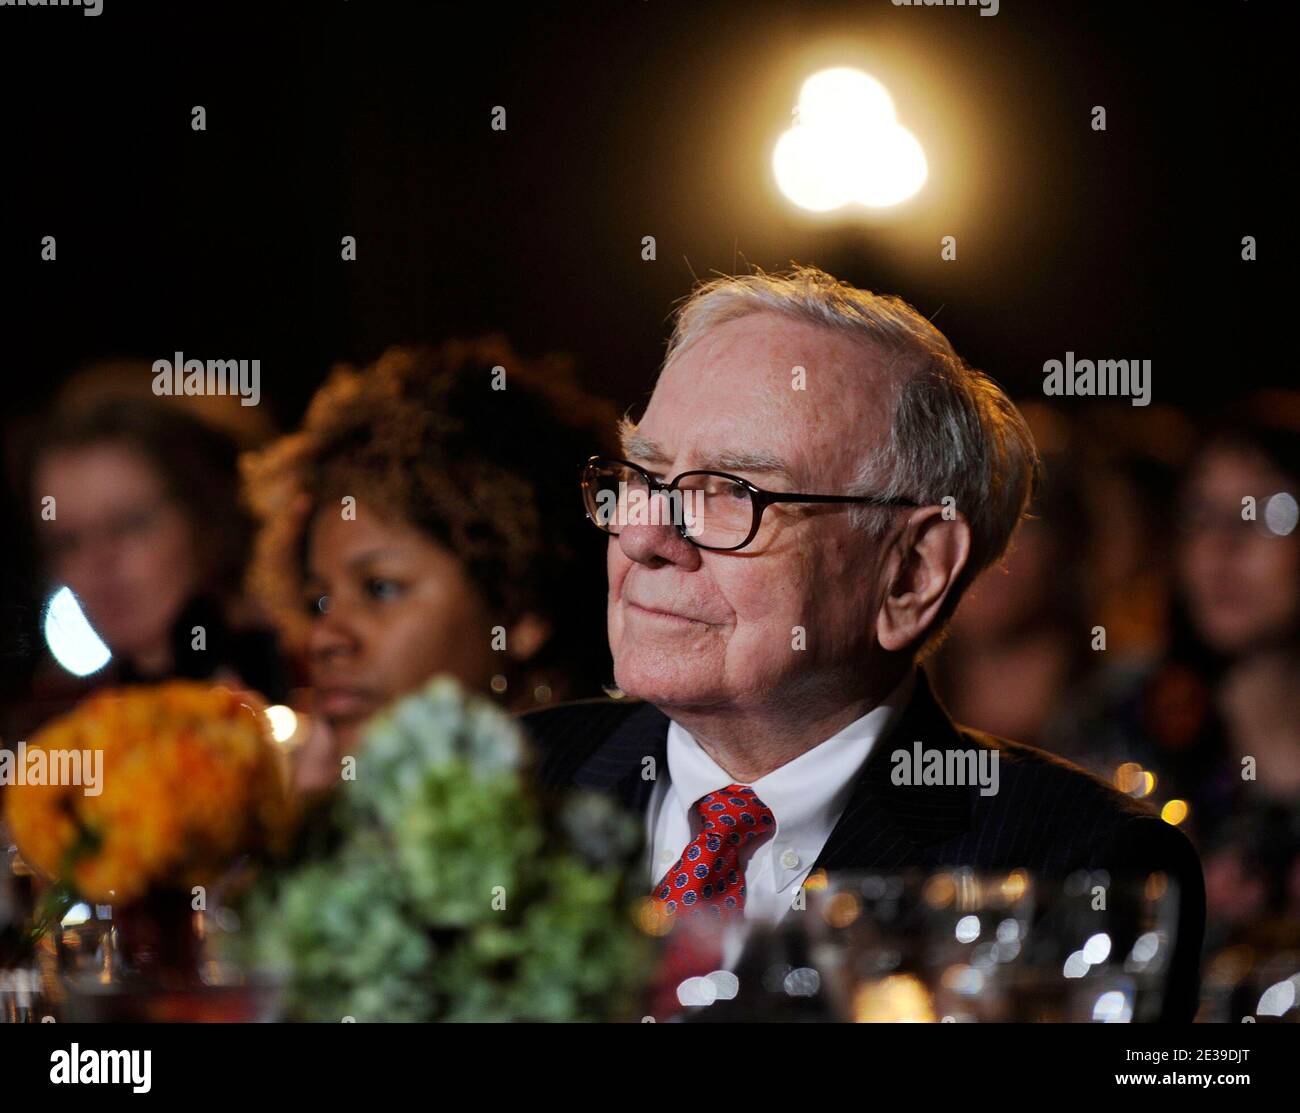 Warren Buffett, Chairman & CEO of Berkshire Hathaway, attends the '2010 Fortune Most Powerful Women Summit' at the Mellon Auditorium in Washington, DC., on October 05, 2010. Photo by Leslie E. Kossoff/ISP Pool/ABACAPRESS.COM (Pictured: Warren Buffett) Stock Photo